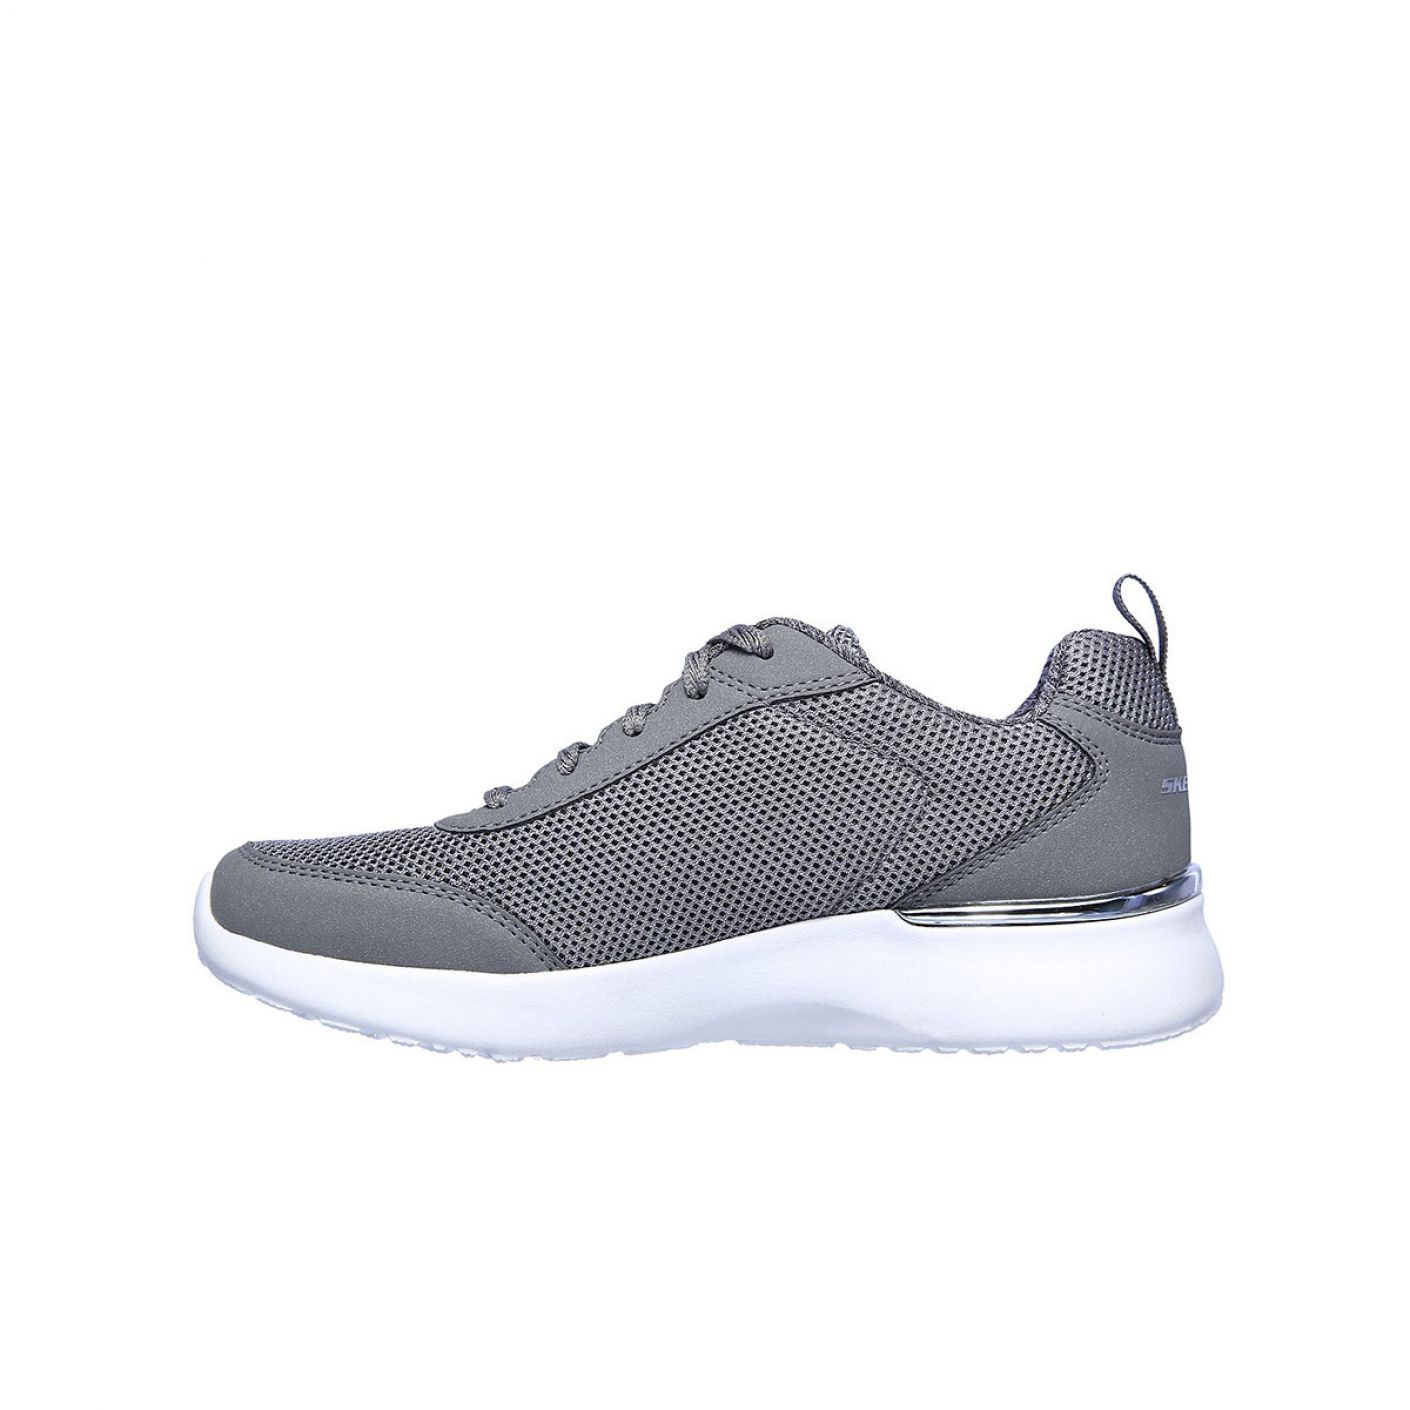 Skechers Air Dynamight Gray Lady